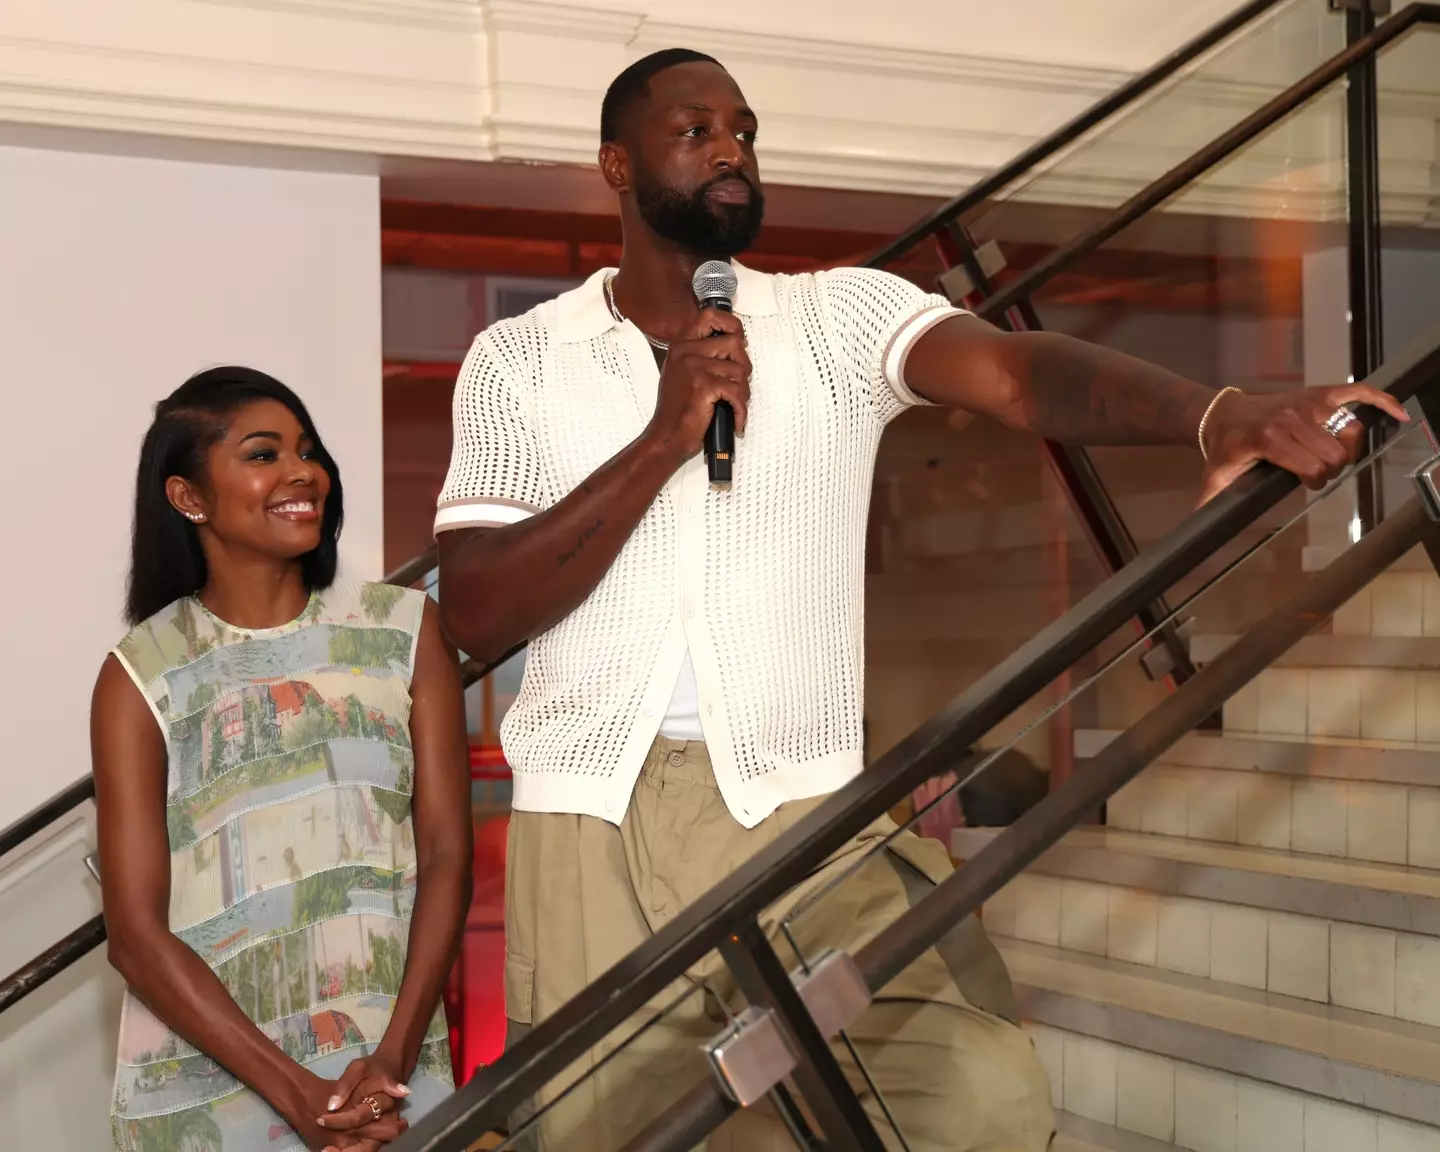 Dwayne Wade recalled the difficult conversation he had with his now-wife.